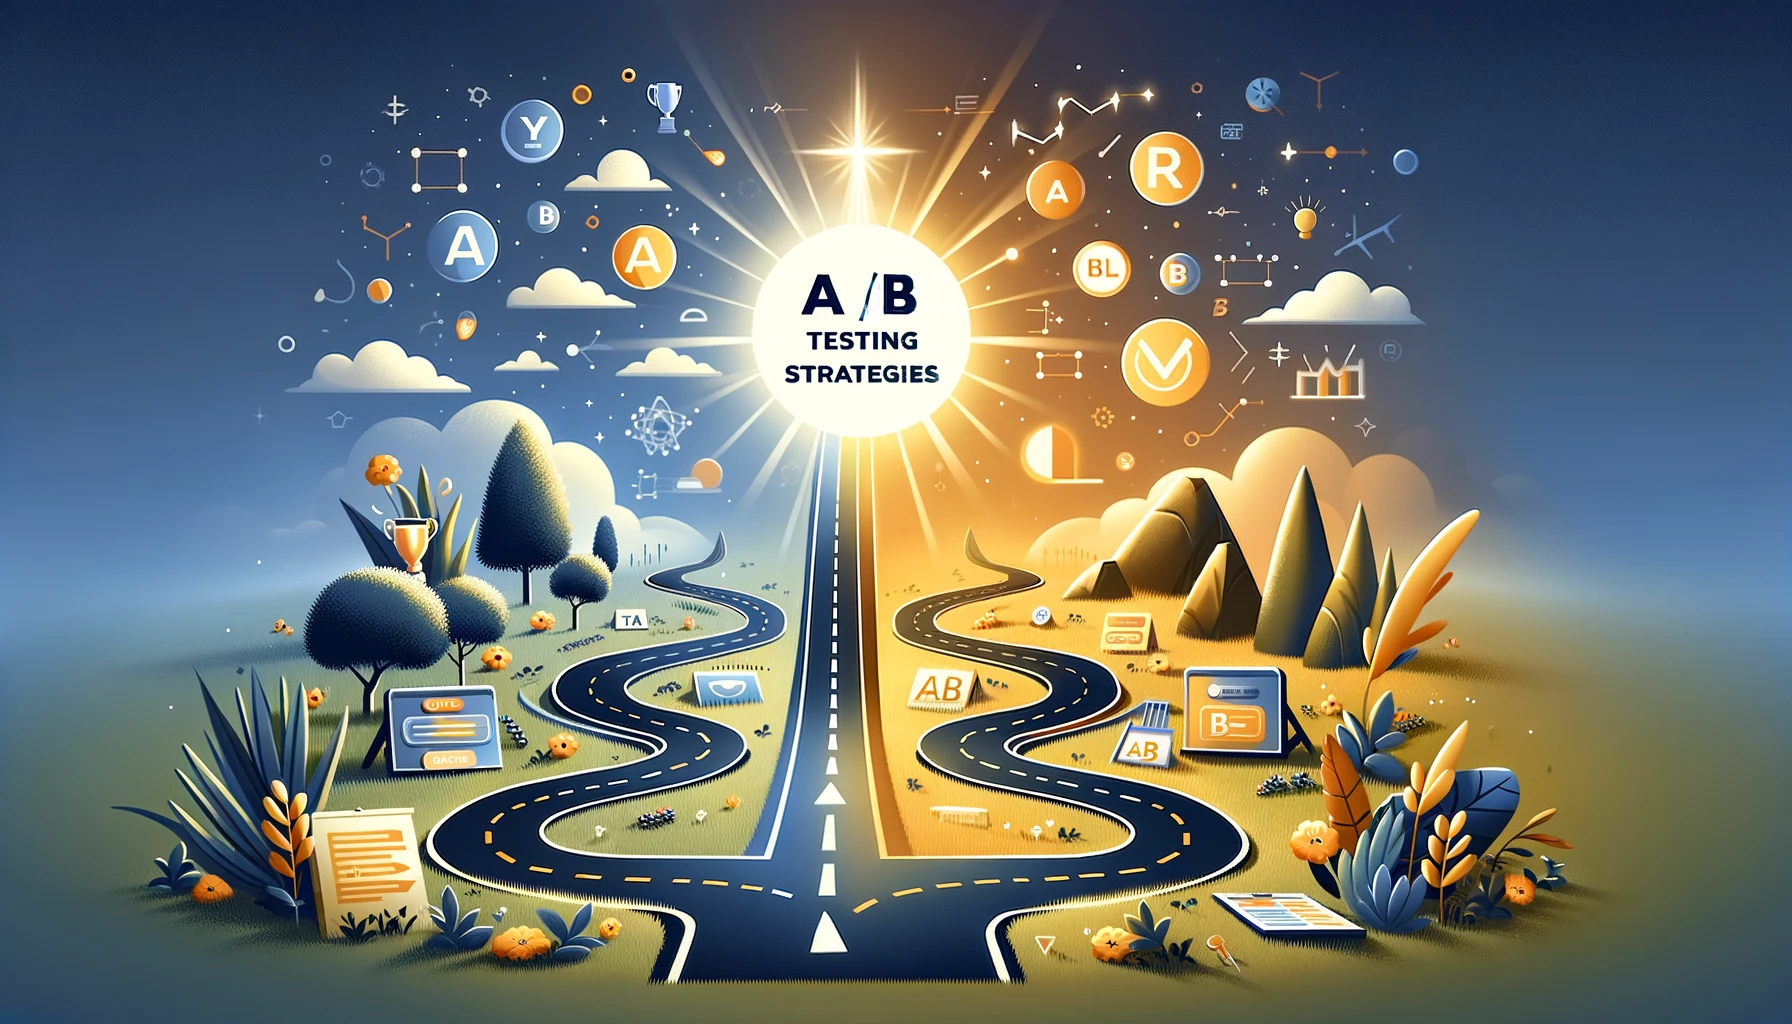 Visual comparison of two pathways symbolizing A/B testing strategies, with one leading to a bright, successful outcome and the other showing potential but less direct.